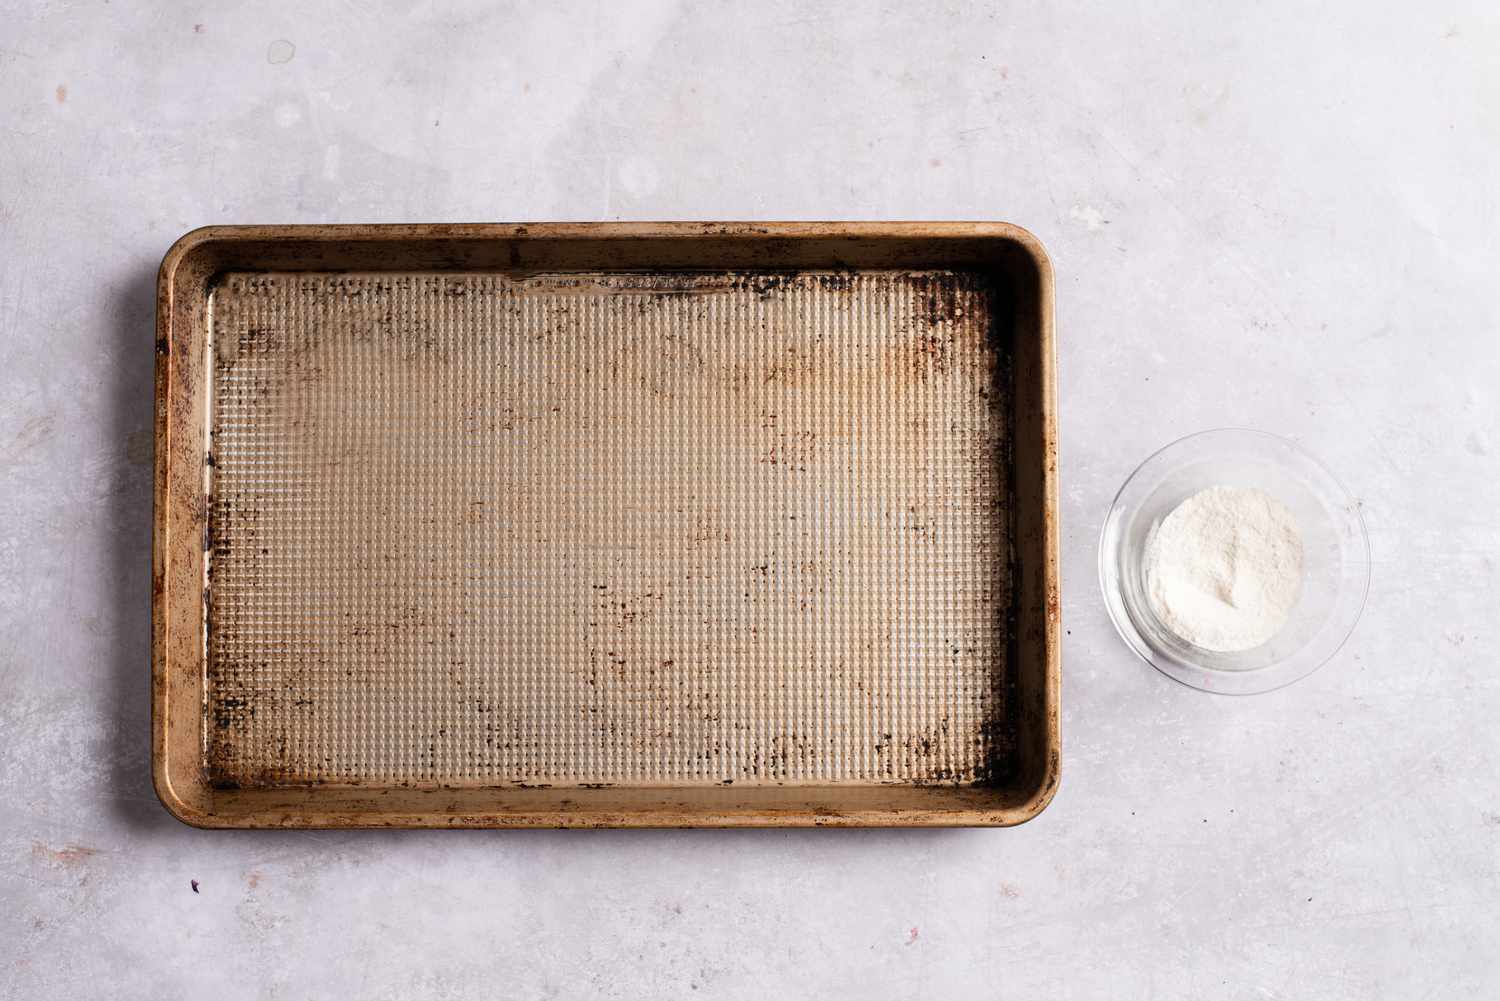 A small bowl of rice flour next to a baking sheet